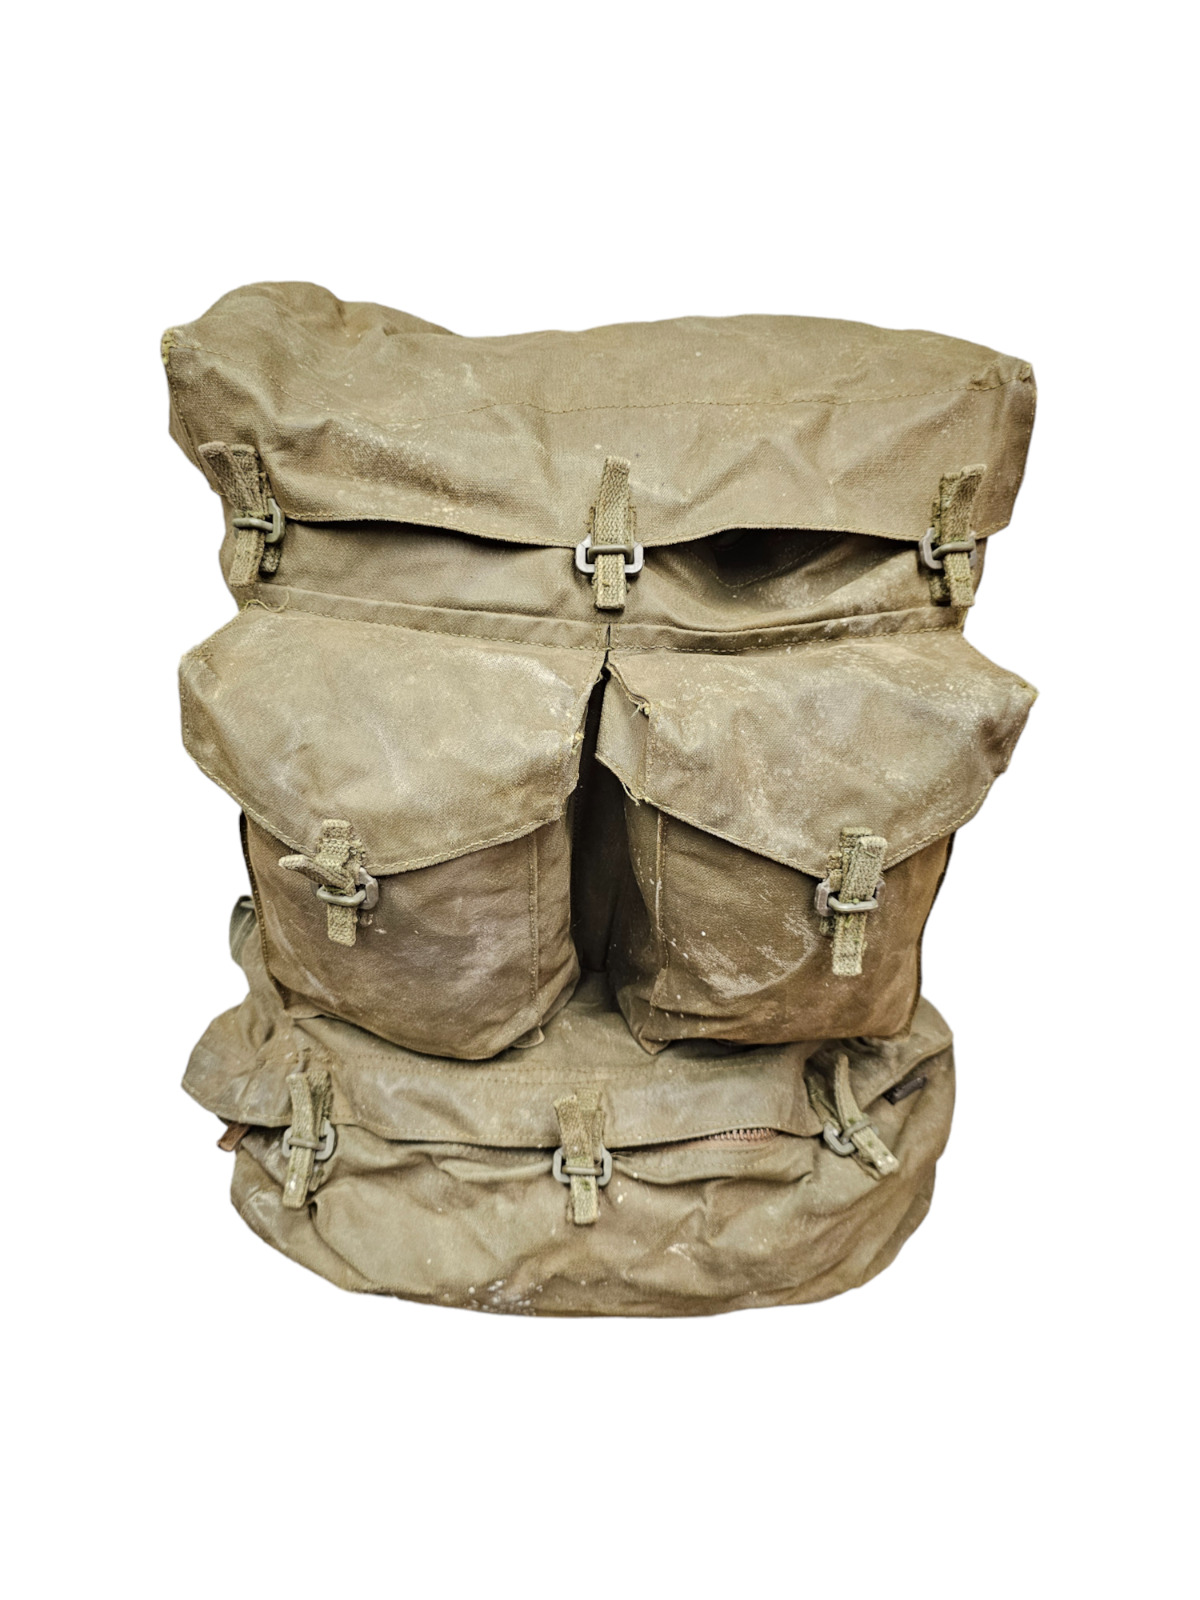 Canadian Armed Forces Pattern 1964 Cargo Pack